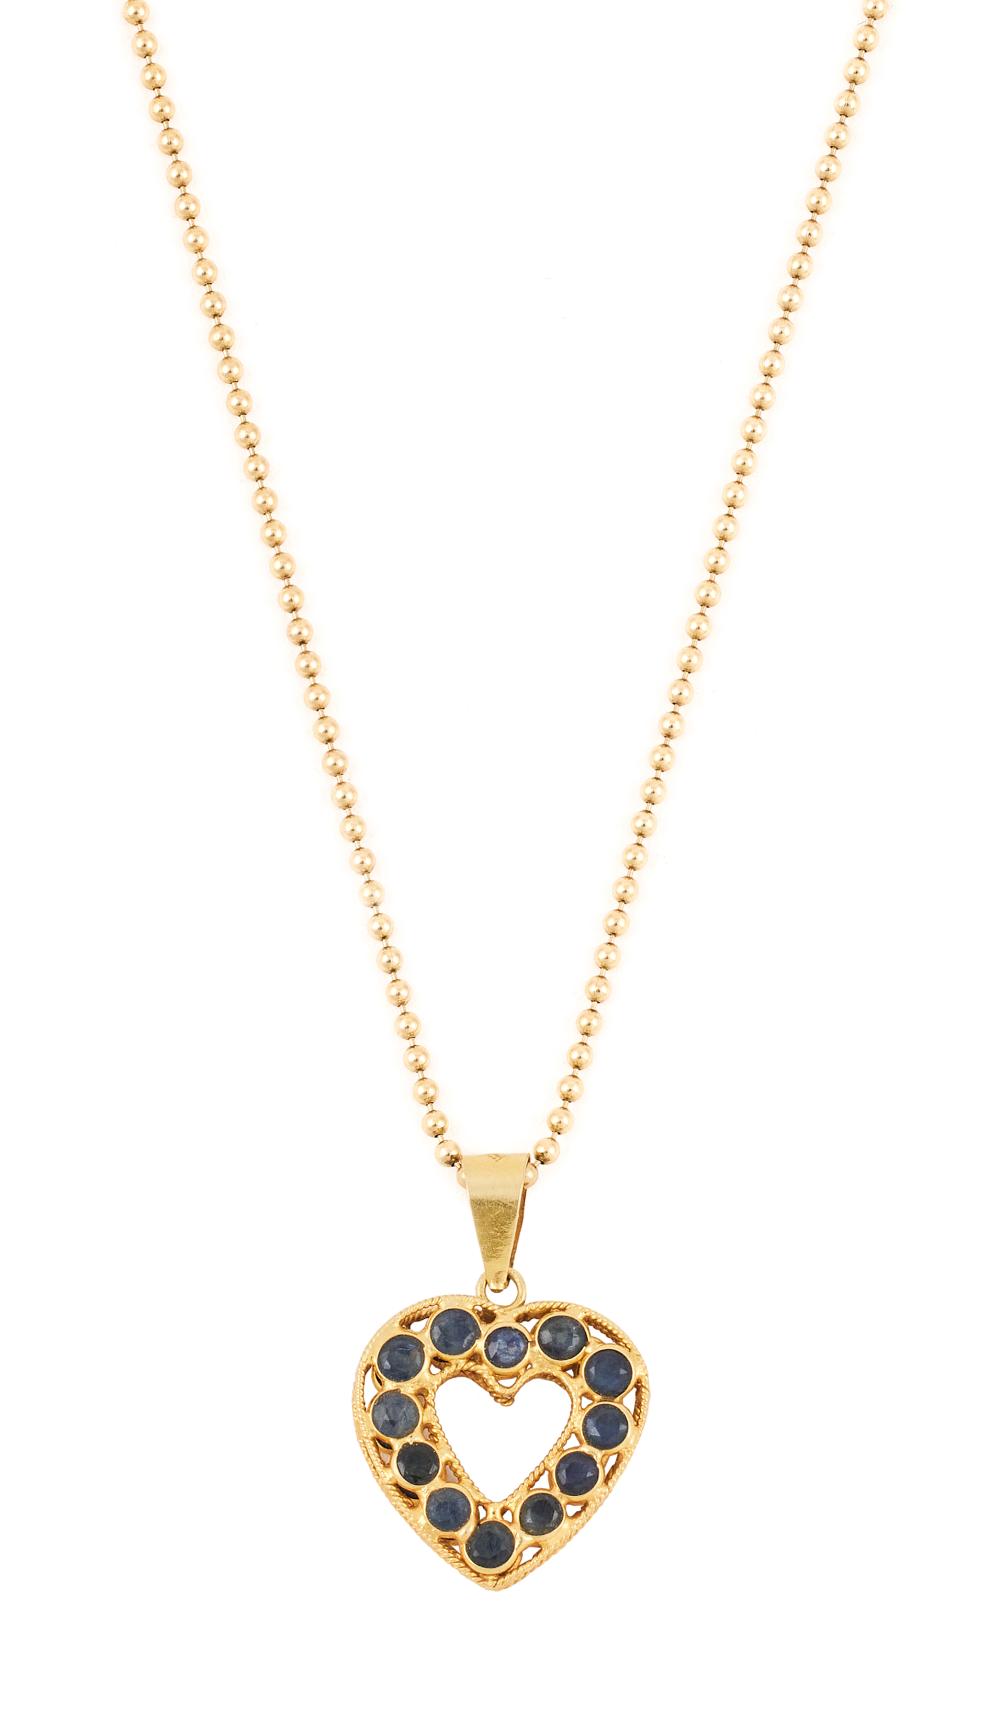 18KT YELLOW GOLD AND SAPPHIRE PENDANT